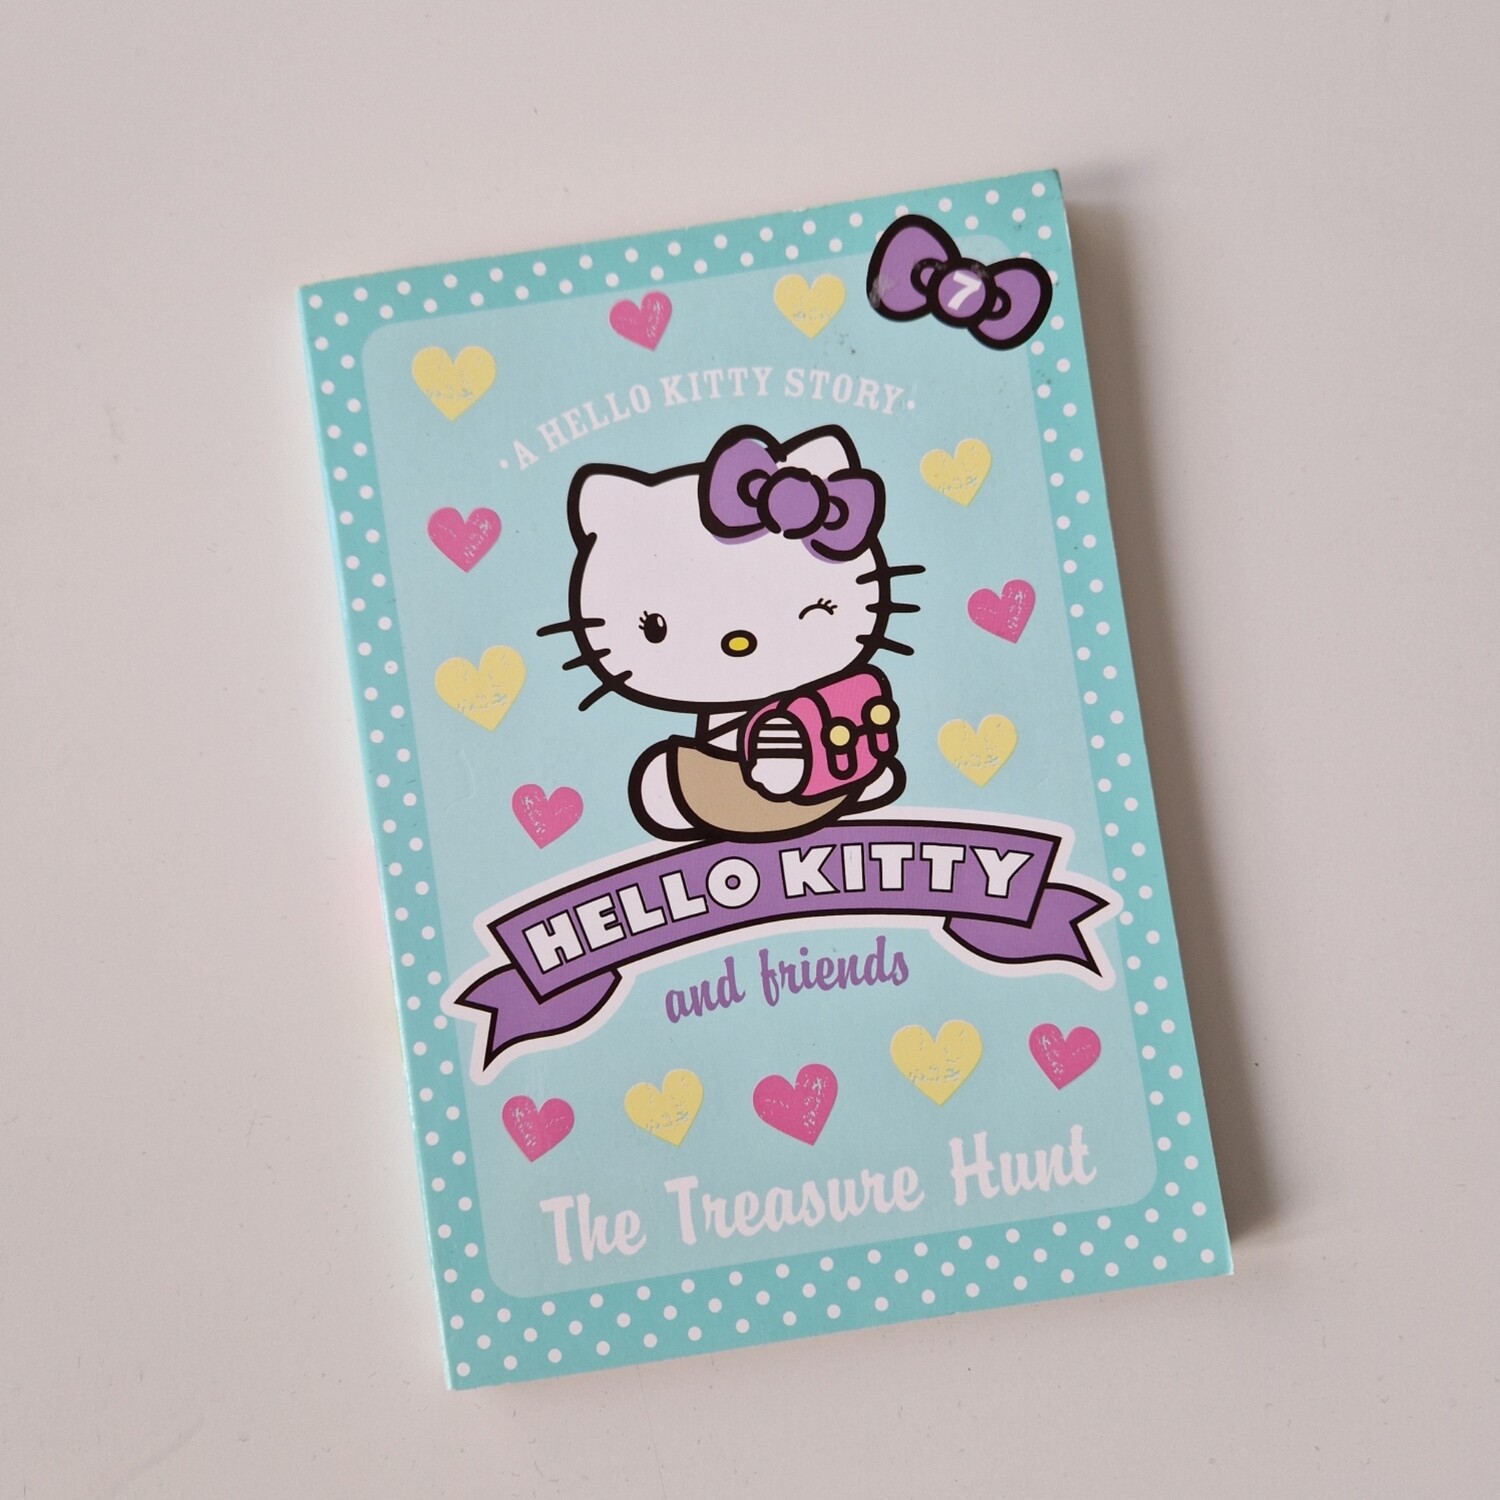 Hello Kitty & Friends Notebook - made from a paperback book, The Treasure Hunt